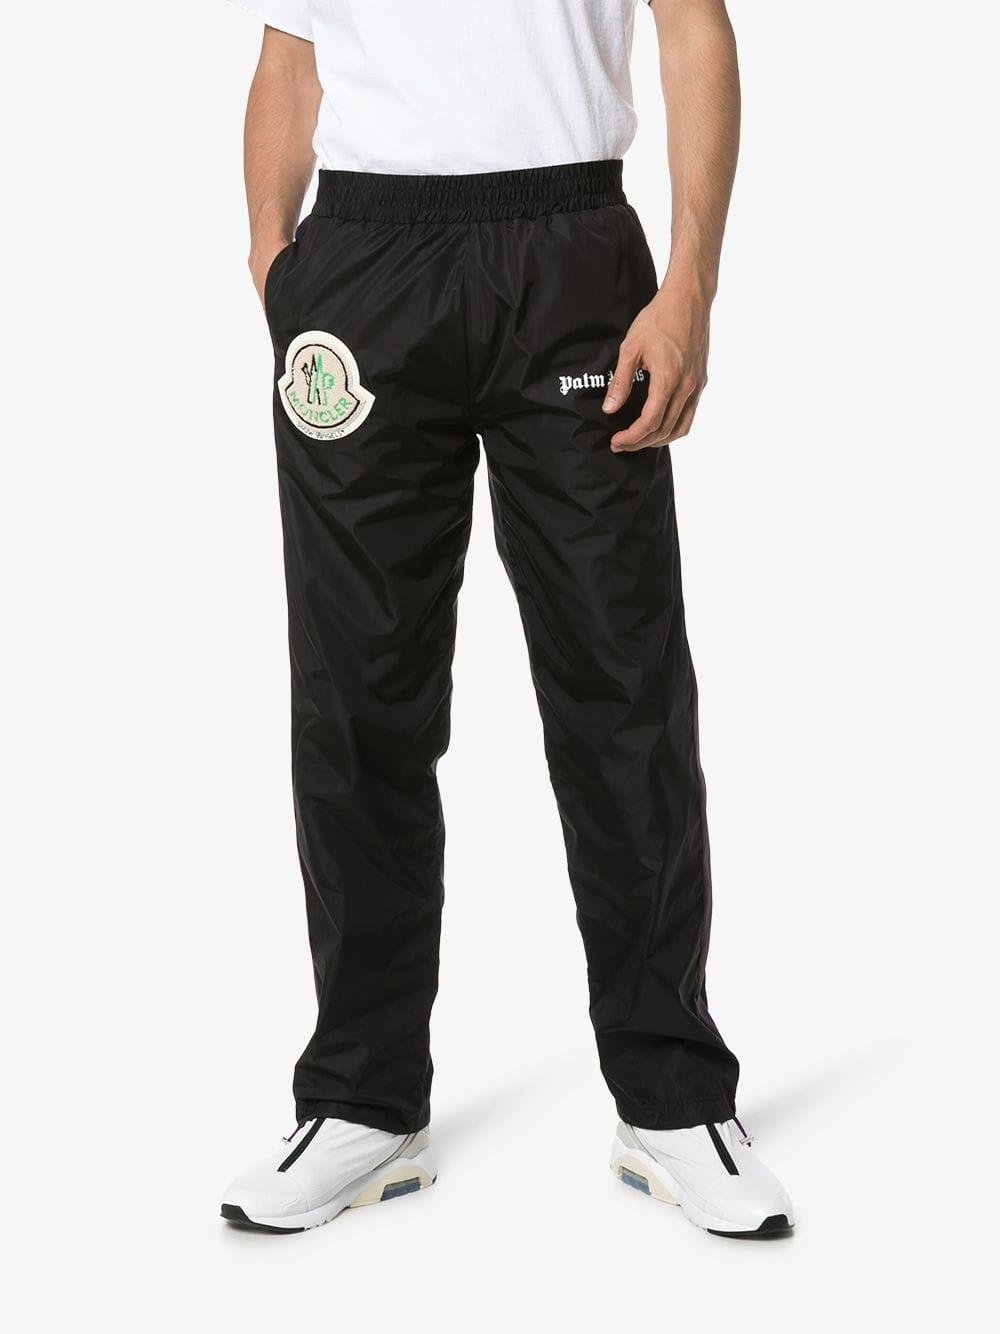 Moncler Genius X Palm Angels Track Pants in Black for Men - Lyst